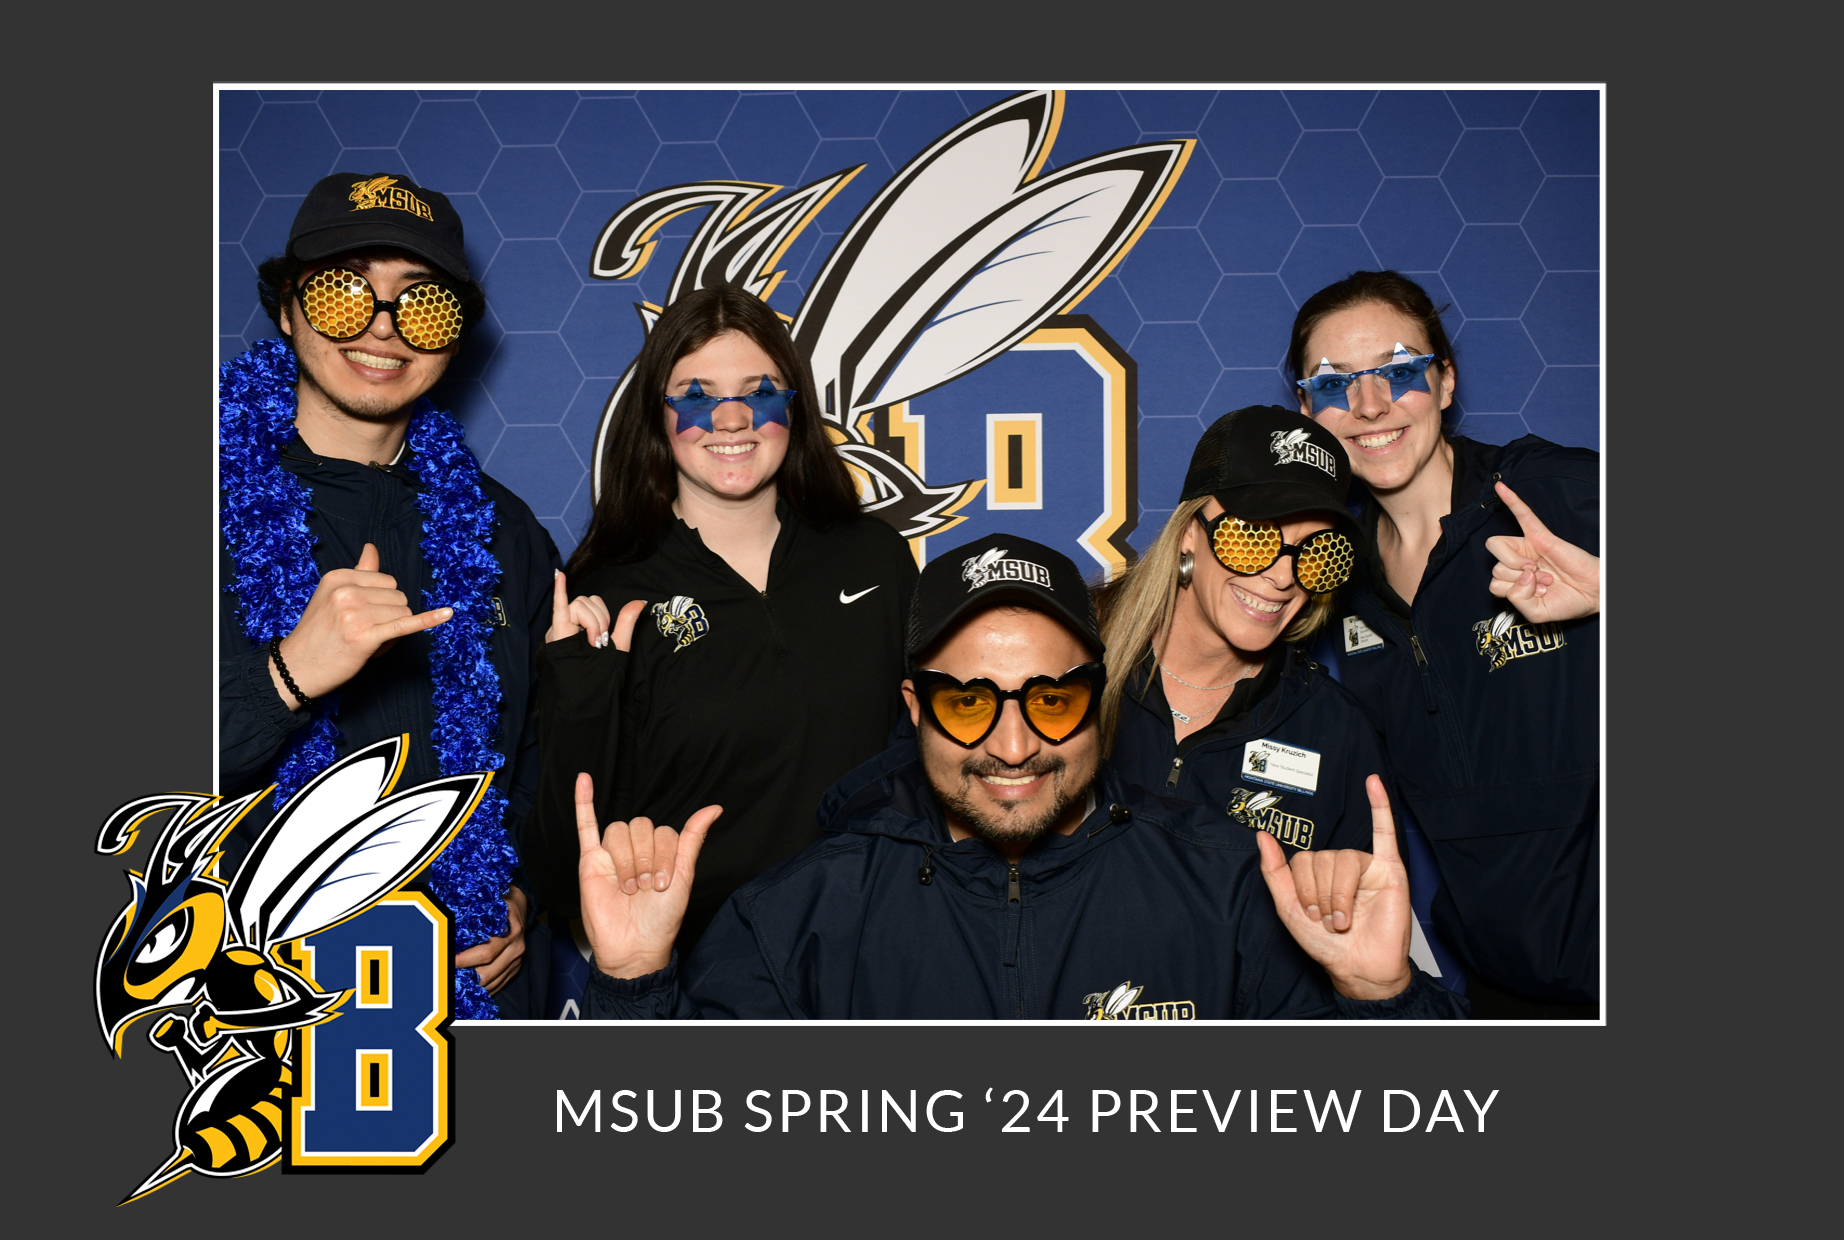 Sample photo from a college preview day event